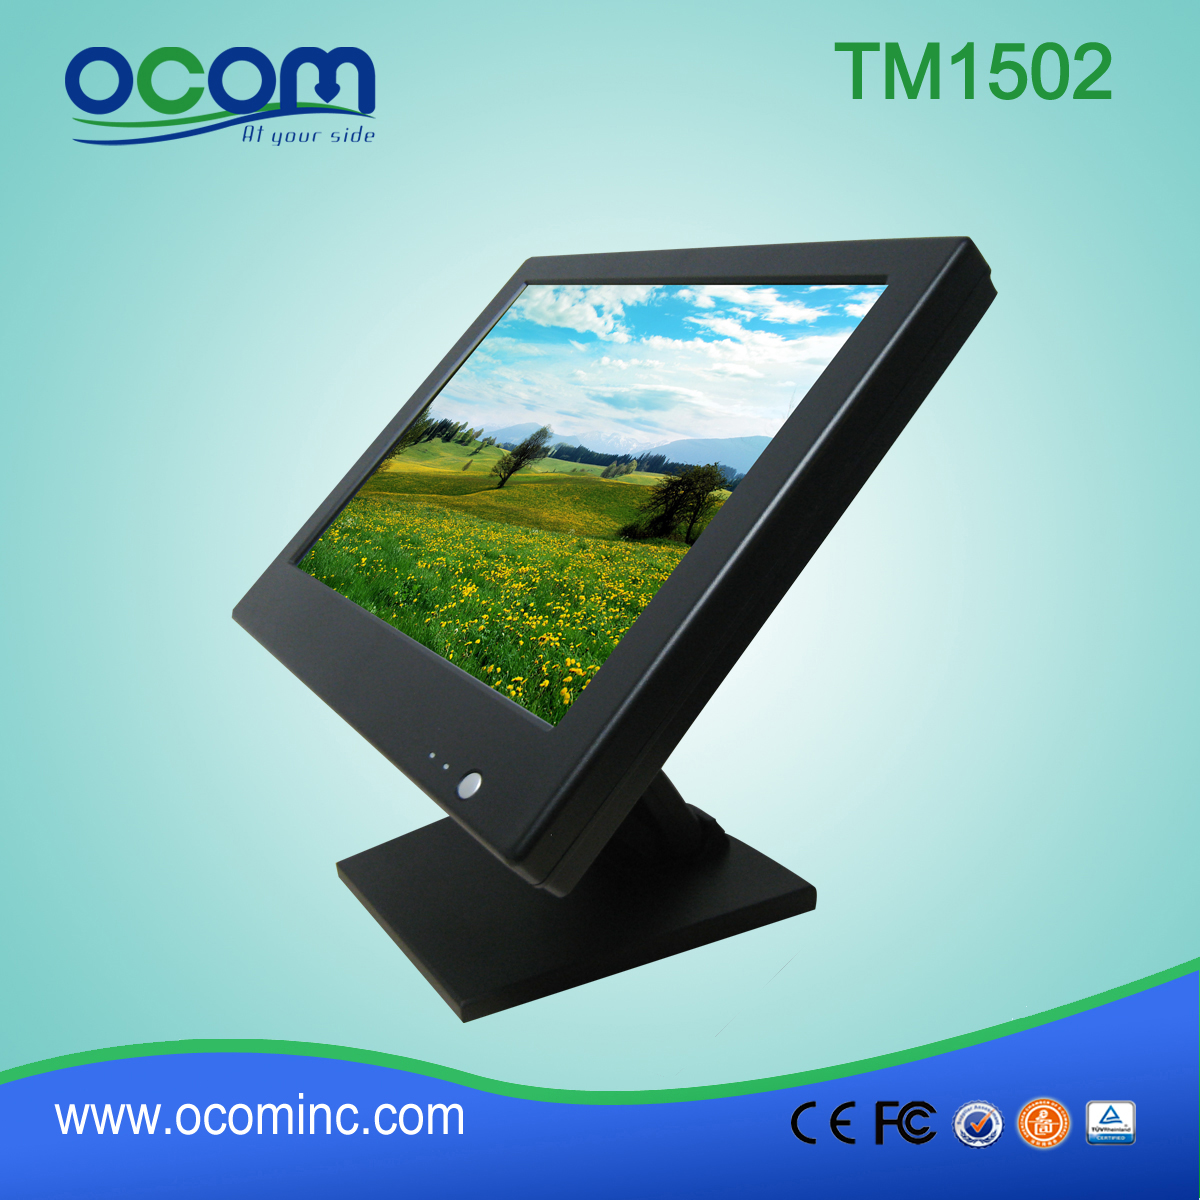 TM1502 15" 4 Wire Resistive Touch Screen Monitor